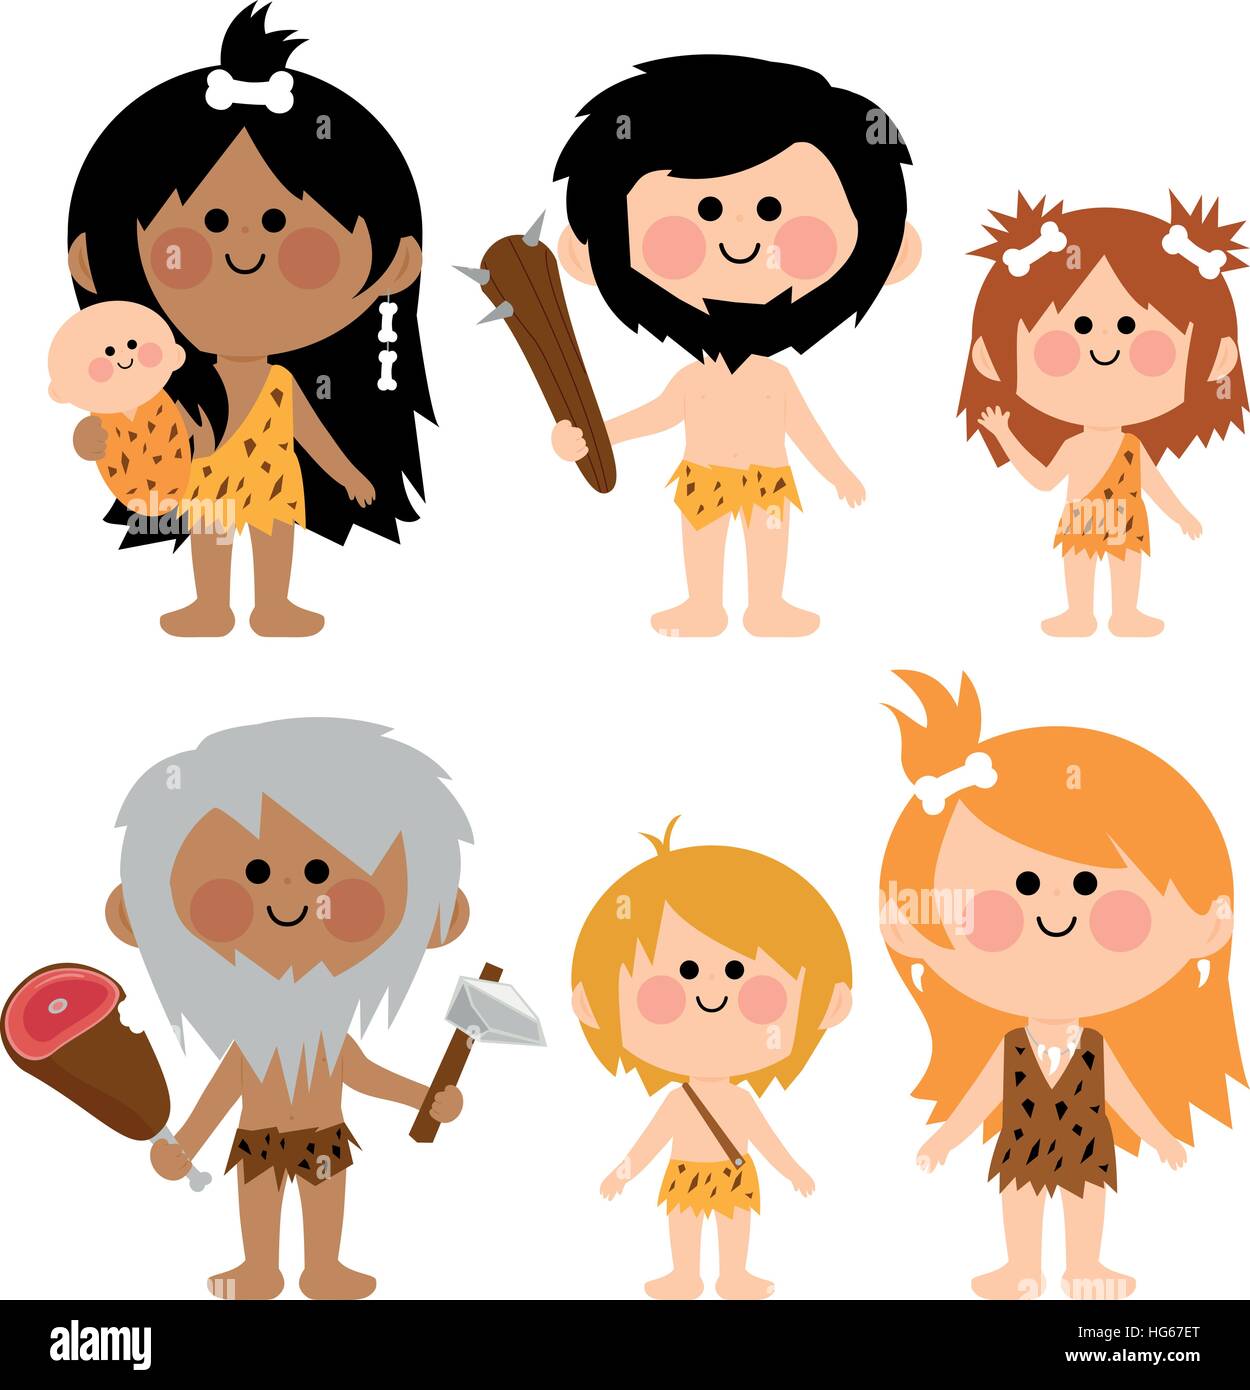 Cavemen were the first to eat lollipops